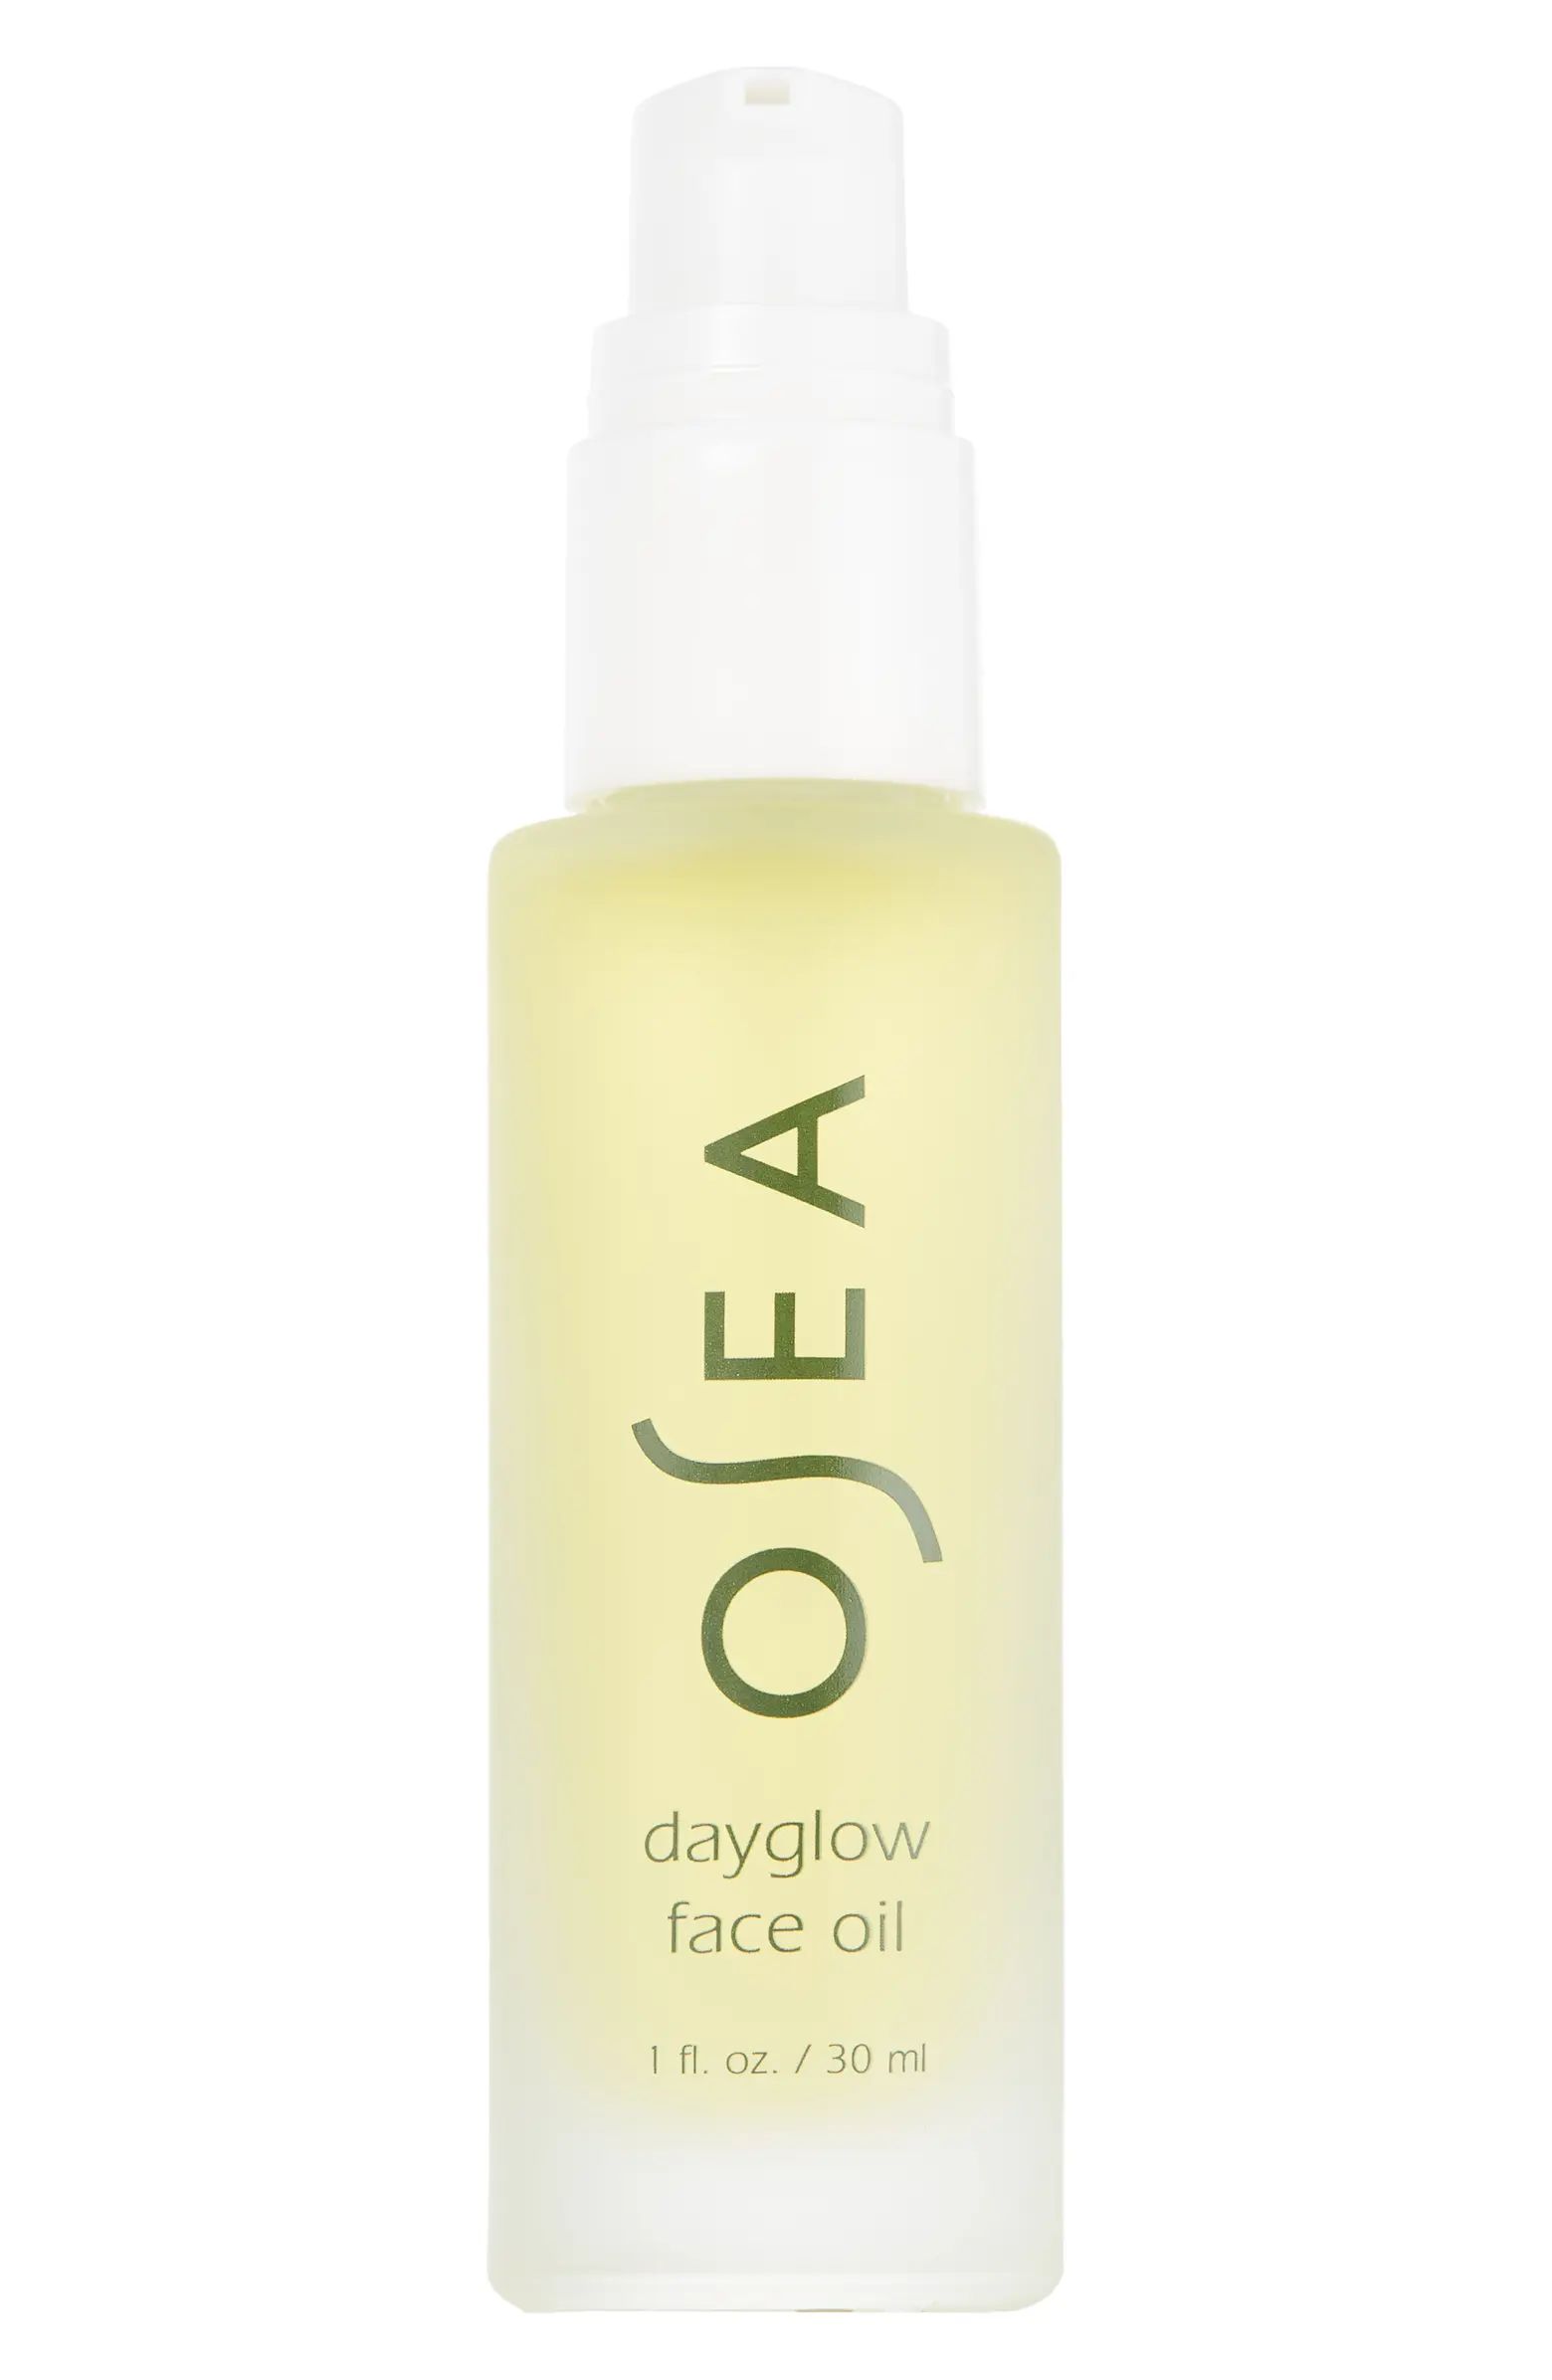 Dayglow Face Oil | Nordstrom